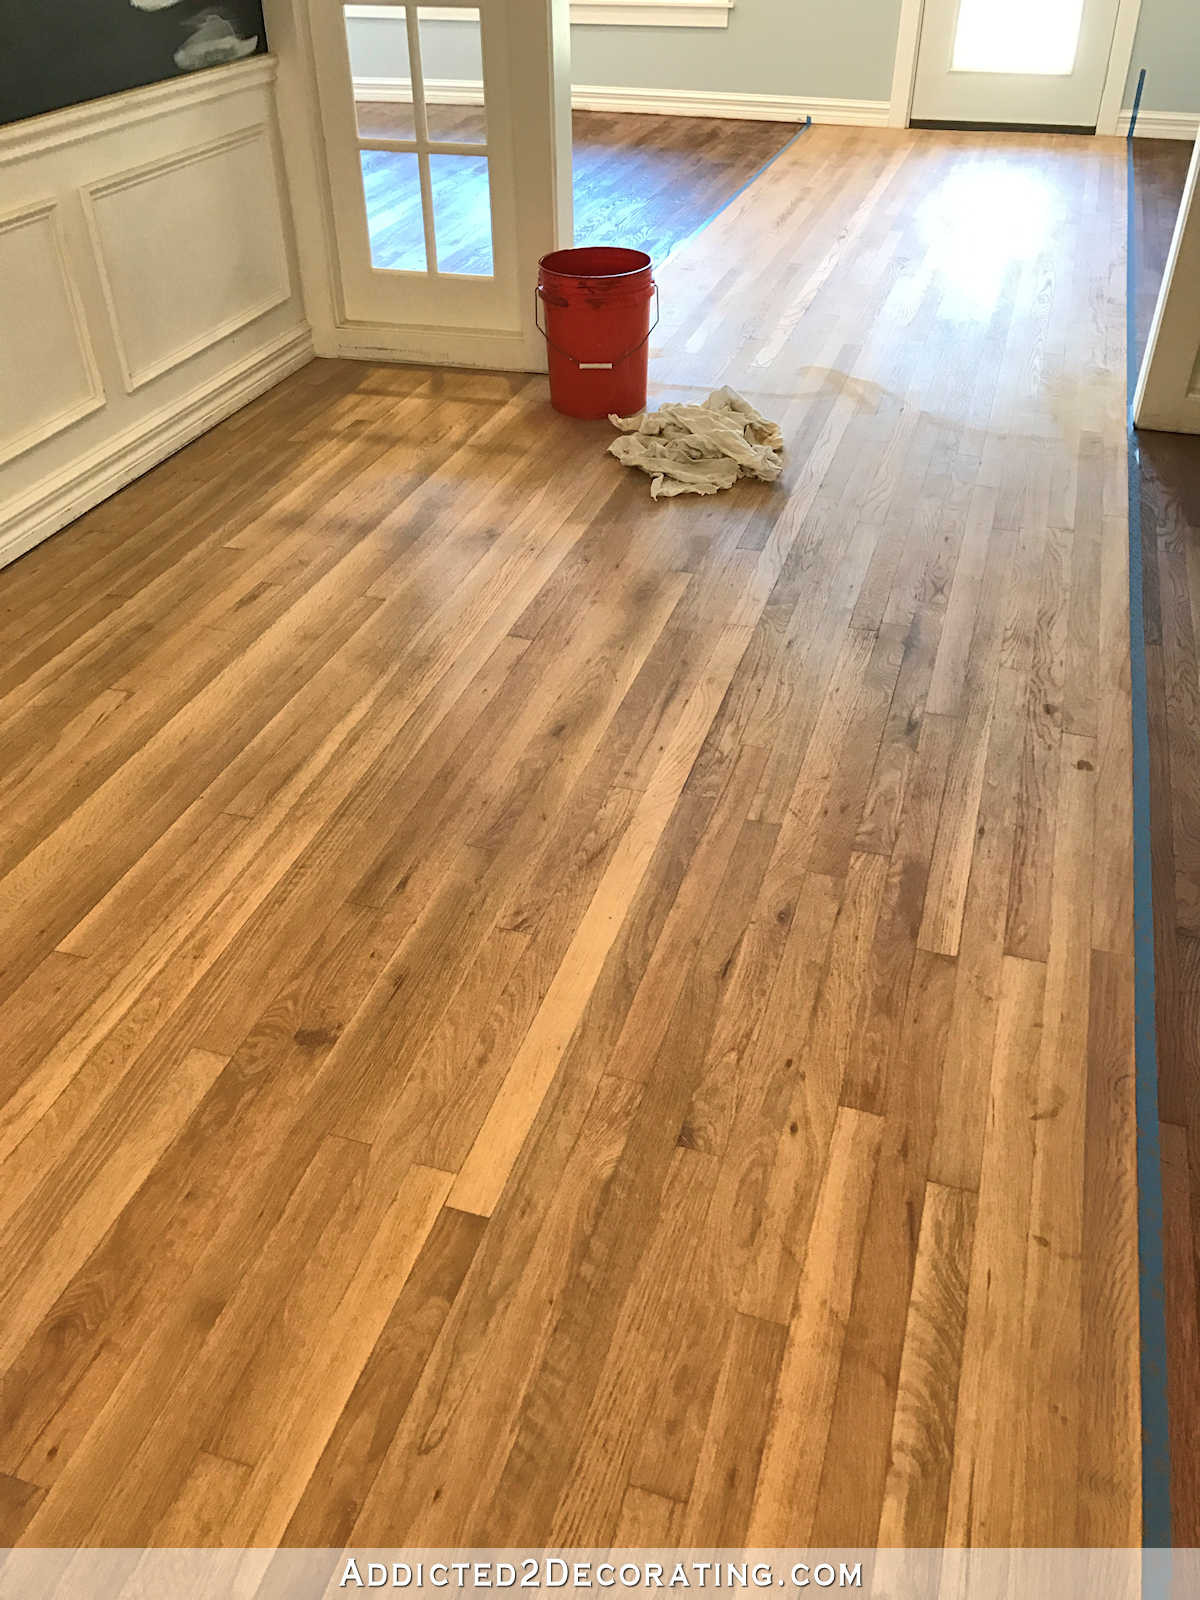 14 Lovely How Much to Refinish Hardwood Floors Yourself 2023 free download how much to refinish hardwood floors yourself of adventures in staining my red oak hardwood floors products process with regard to staining red oak hardwood floors 8 entryway and music room 